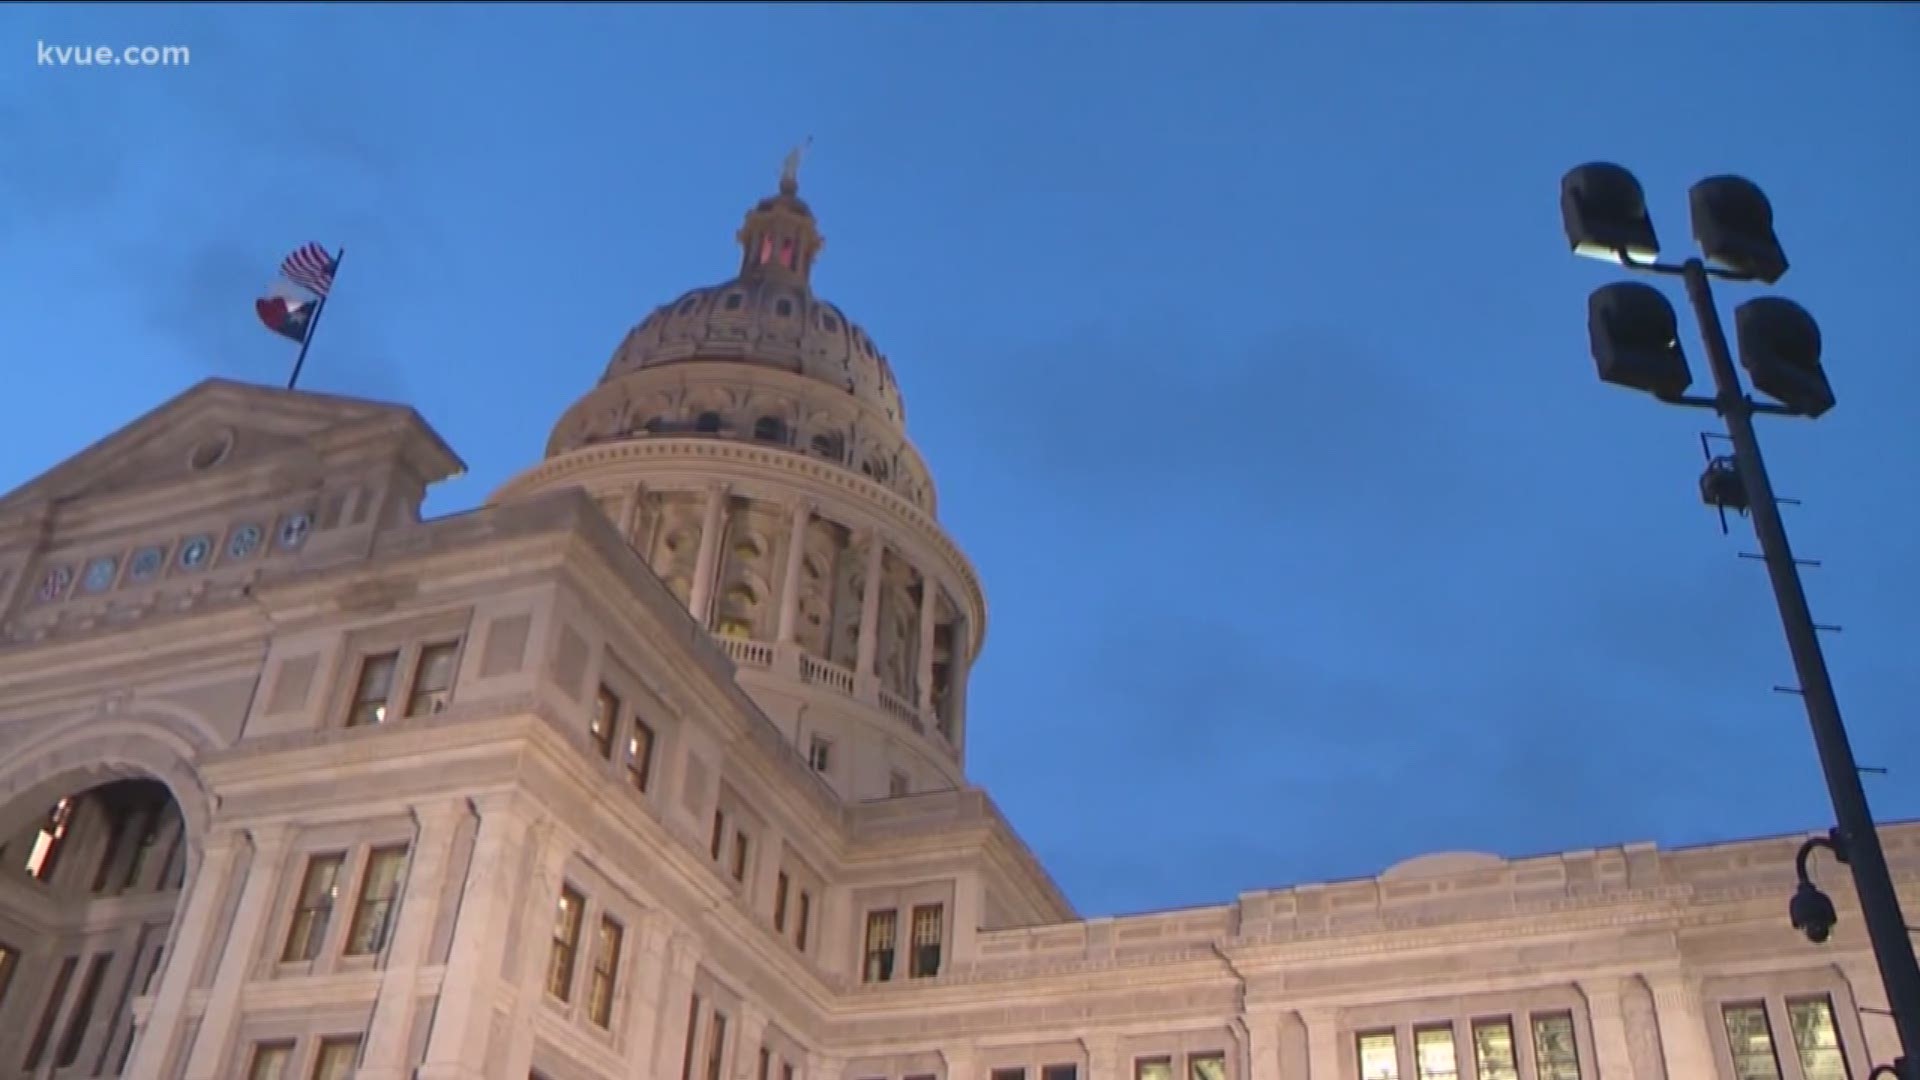 Texas representatives have until midnight Thursday to initially pass any House bills.